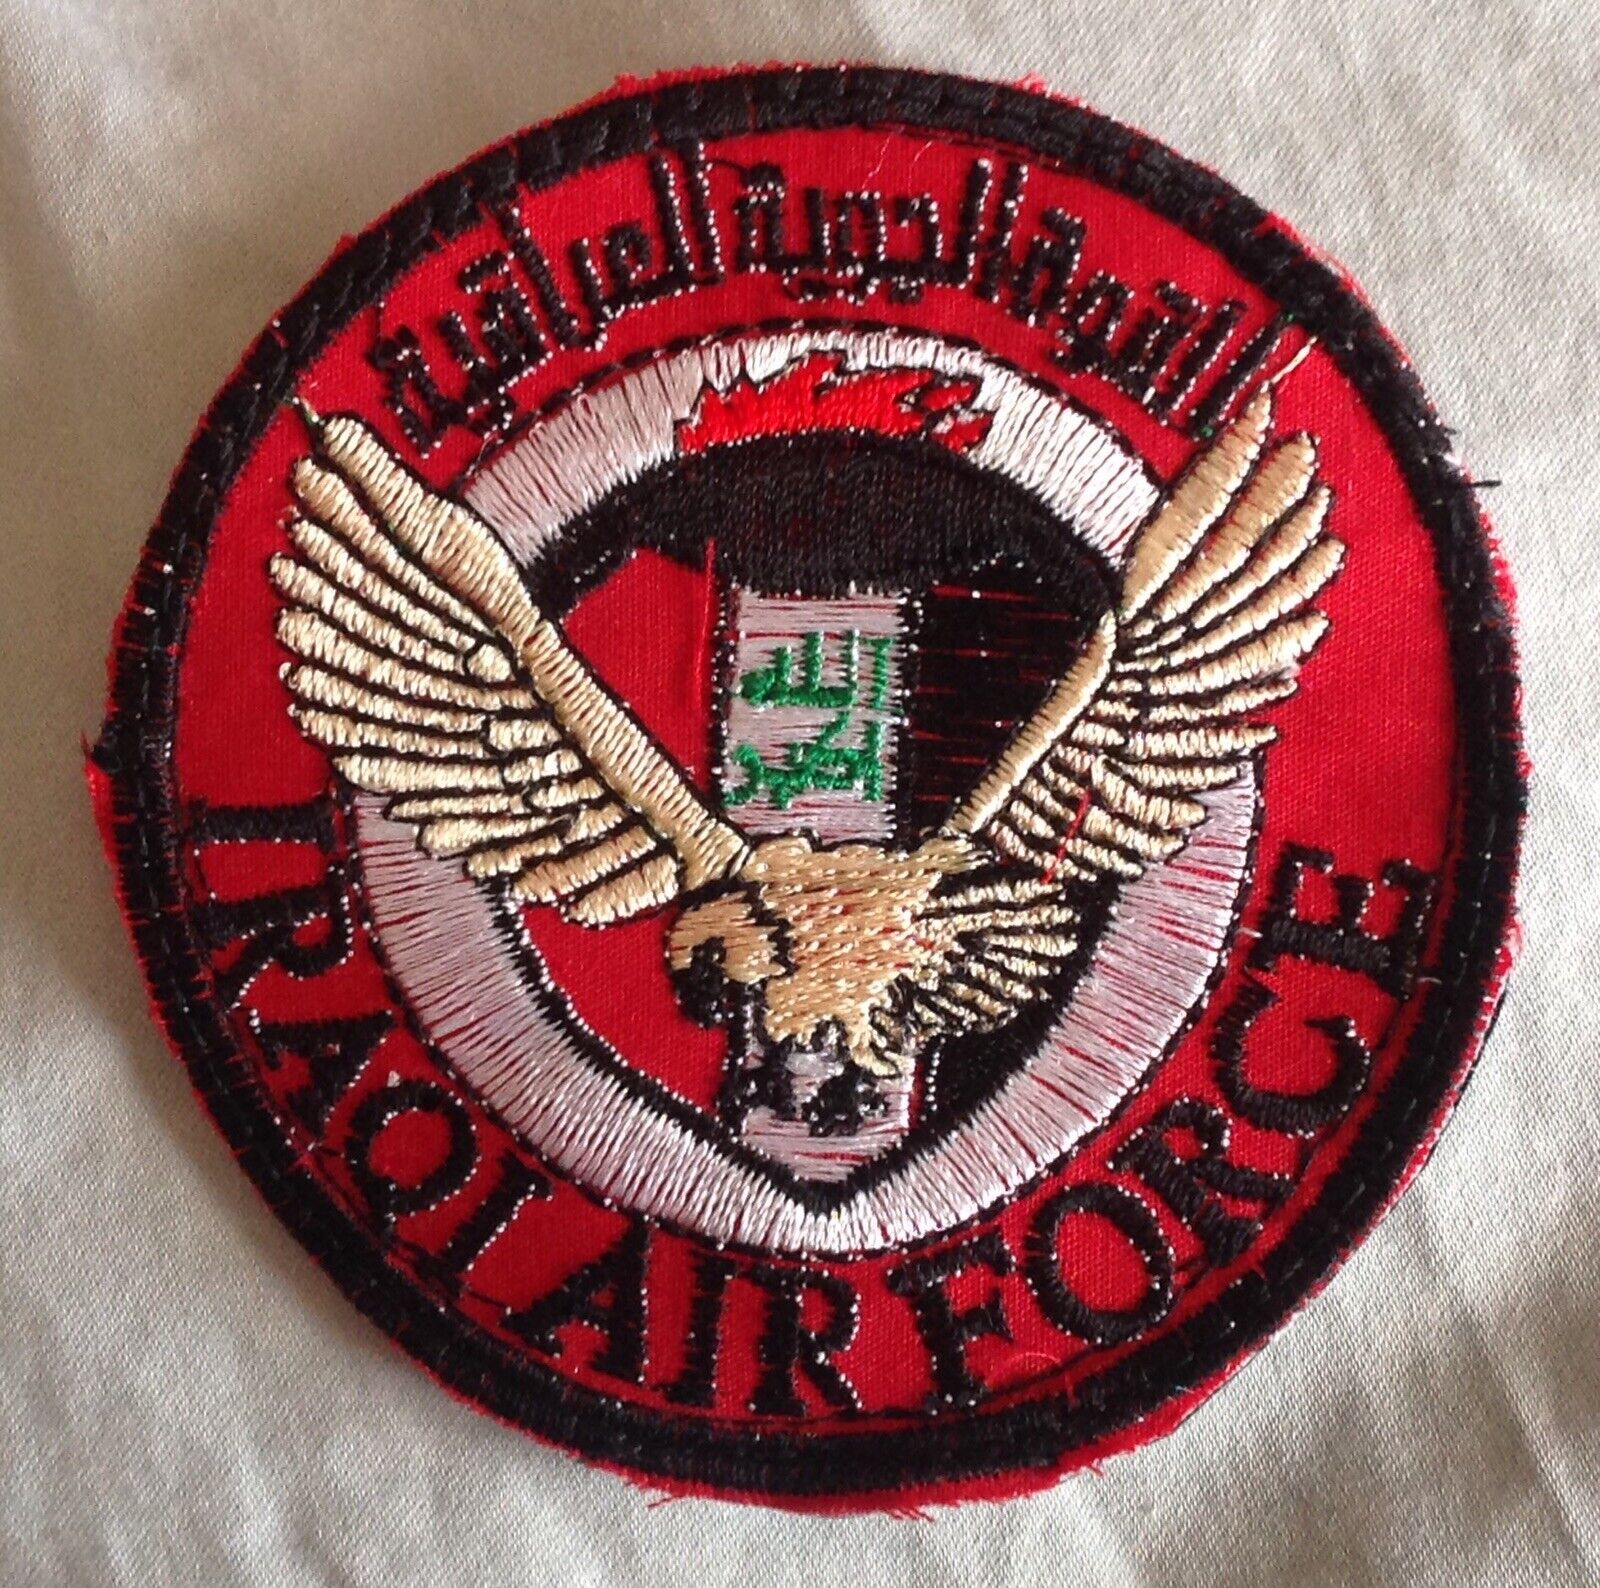 Iraqi Air Force Patch